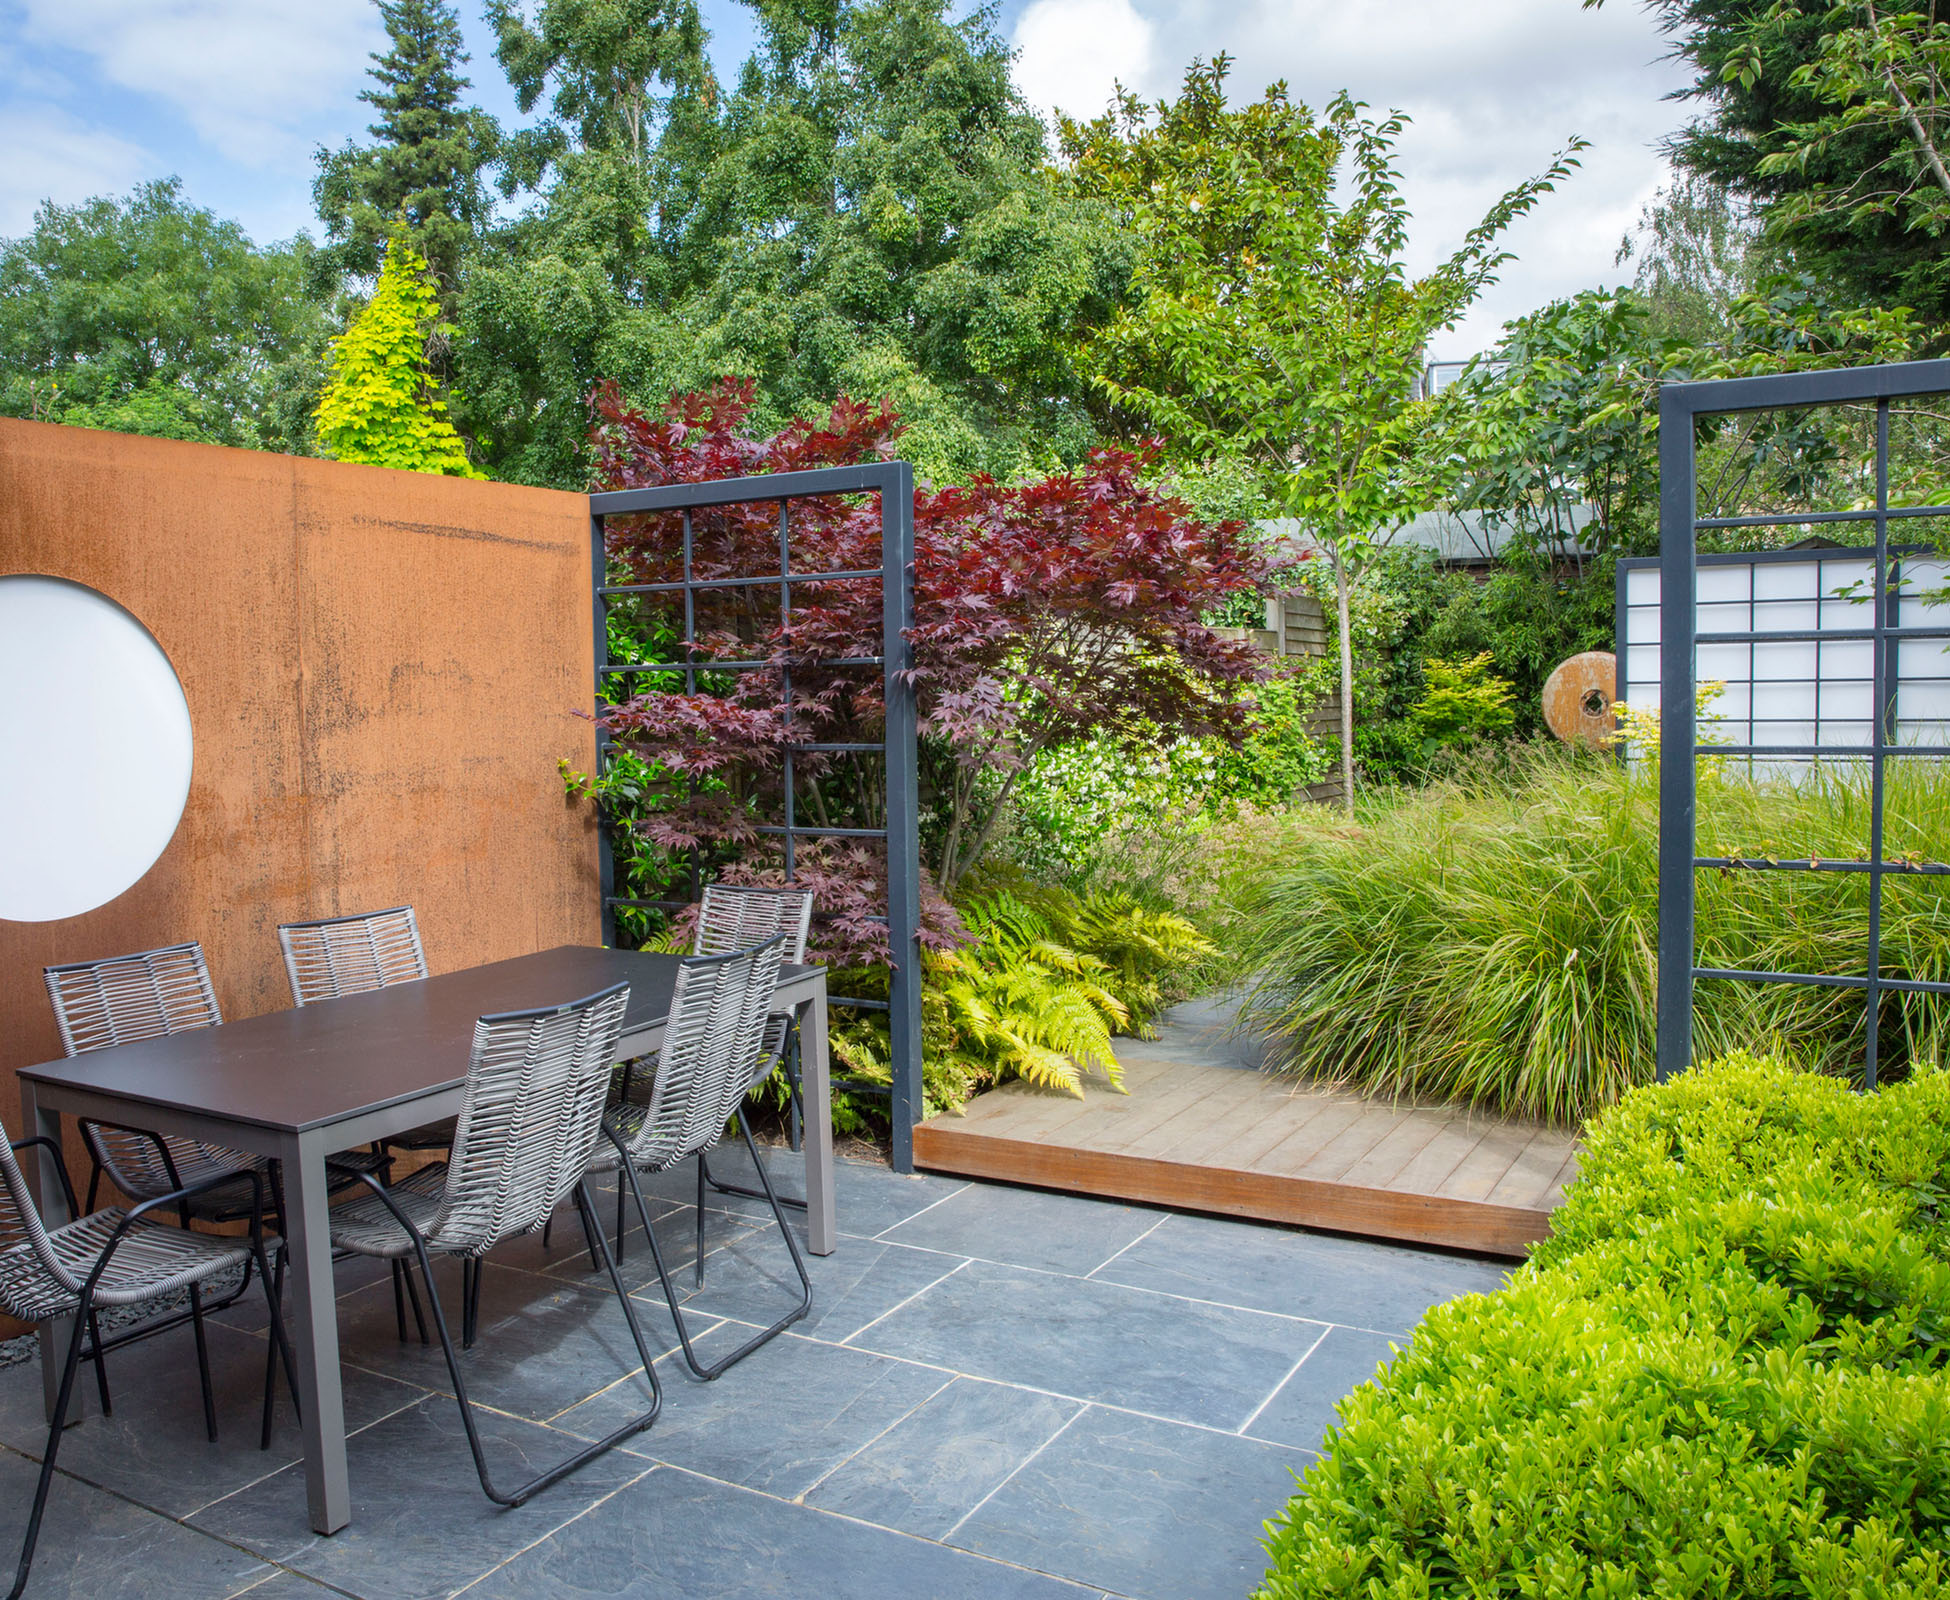 A Corten Steel Moon window becomes a feature of this garden. 